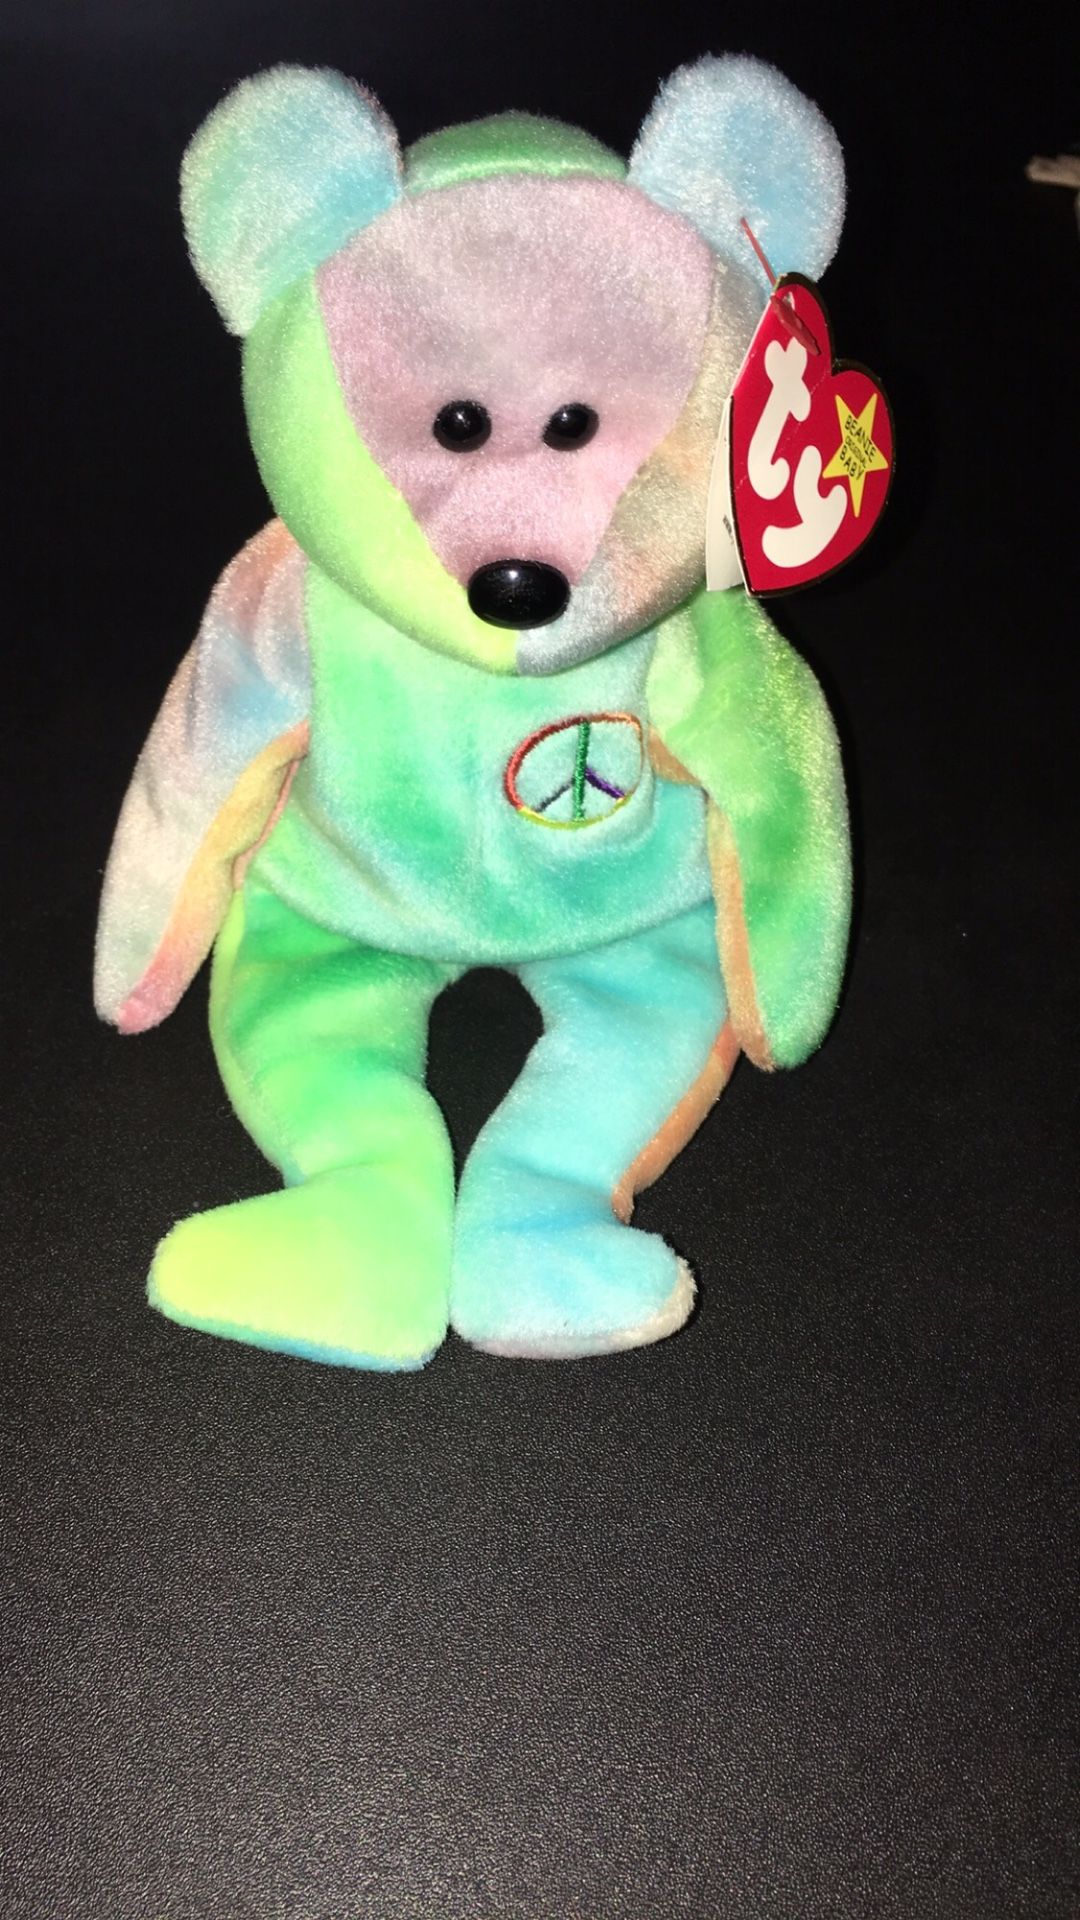 Peace (1996) Ty Beanie Baby Bear PE Pellets Authentic Super Rare Retired No swing tag errors Great Condition Collectible